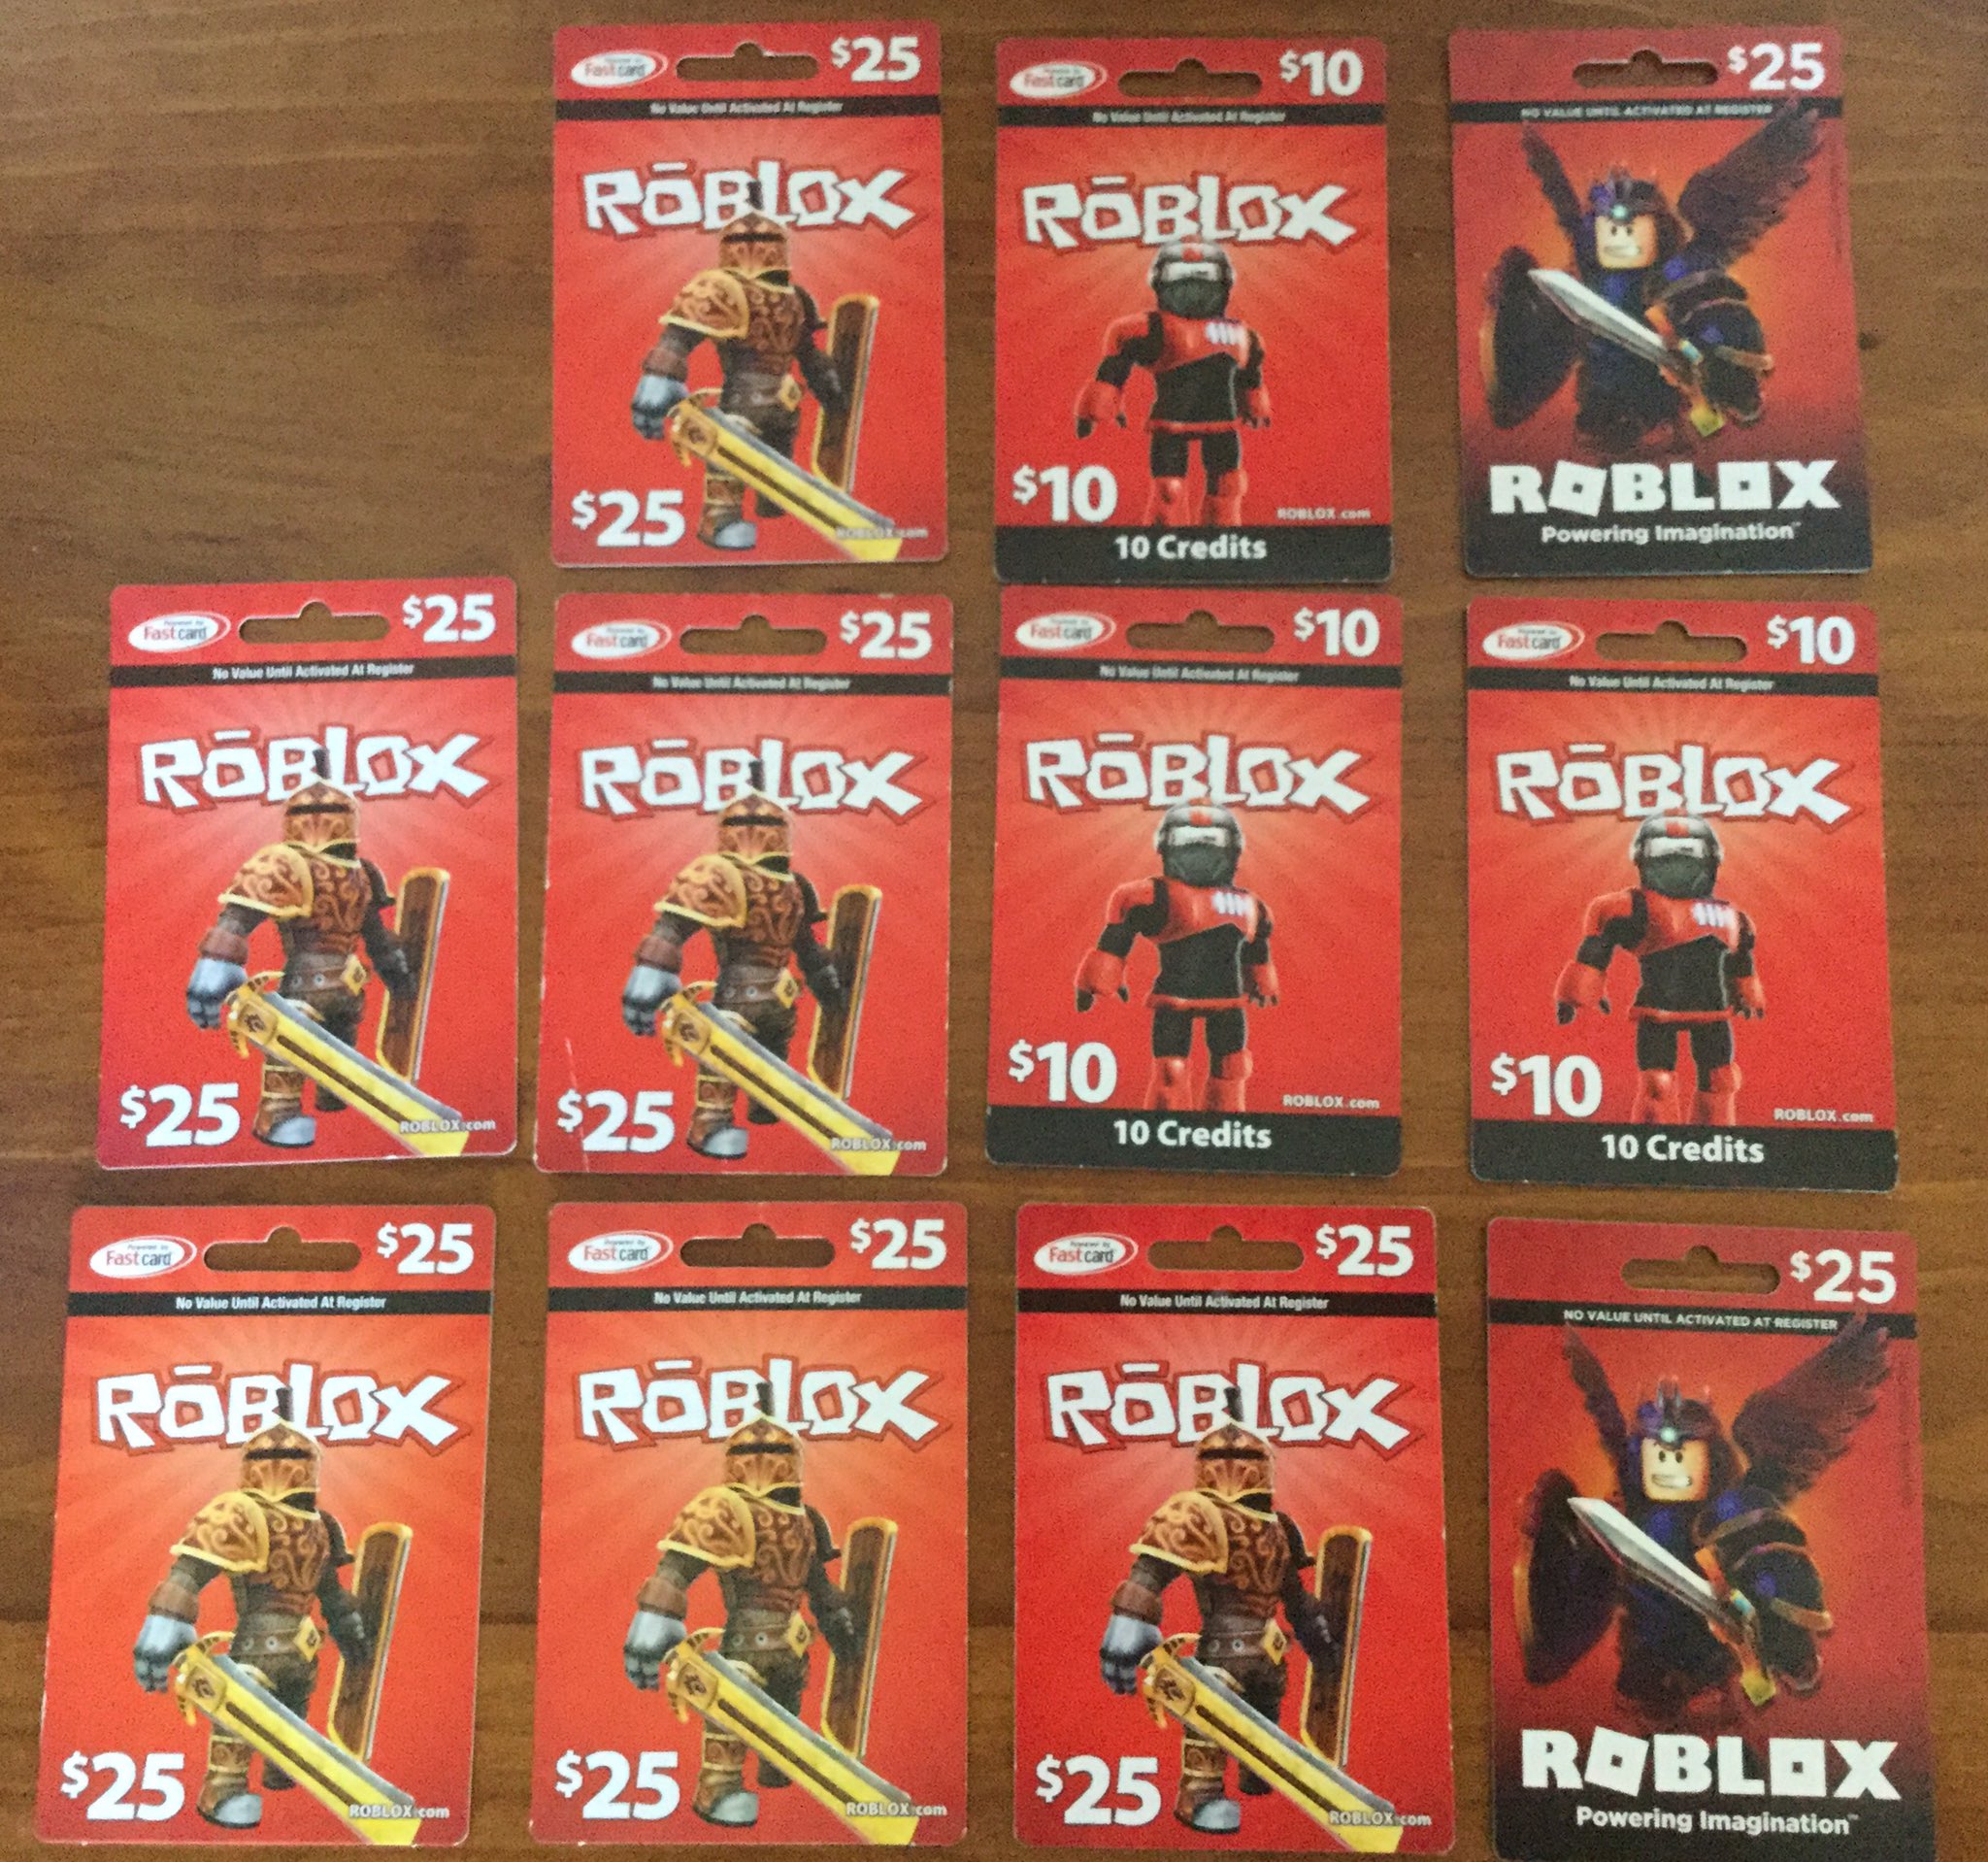 75602gamer On Twitter How Many Roblox Gift Cards Do You Have - where to buy roblox gift cards in hong kong